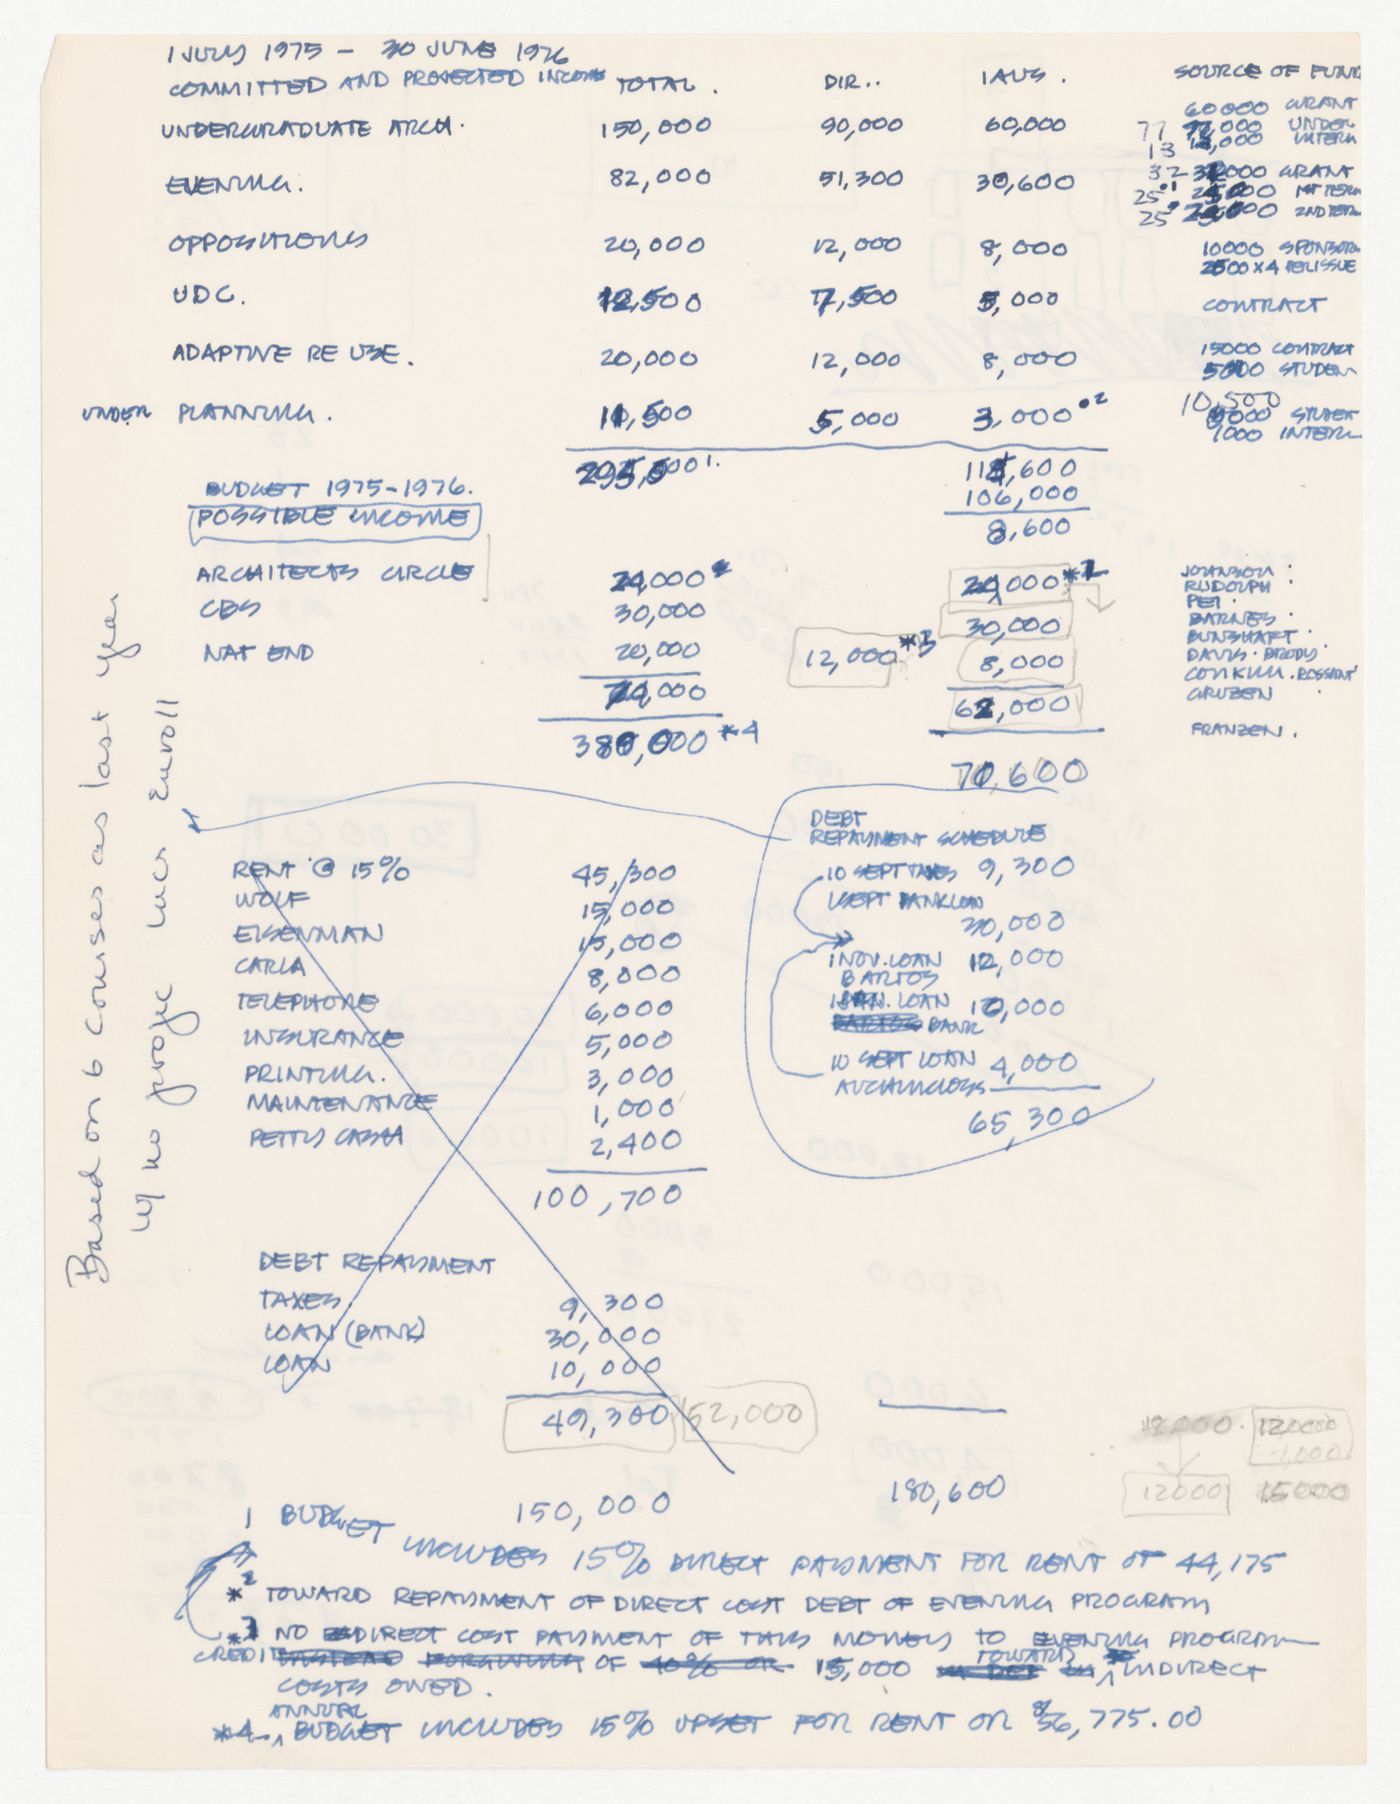 Draft for commited and projected income and dept repayment schedule from July 1st, 1975 to June 30th, 1976